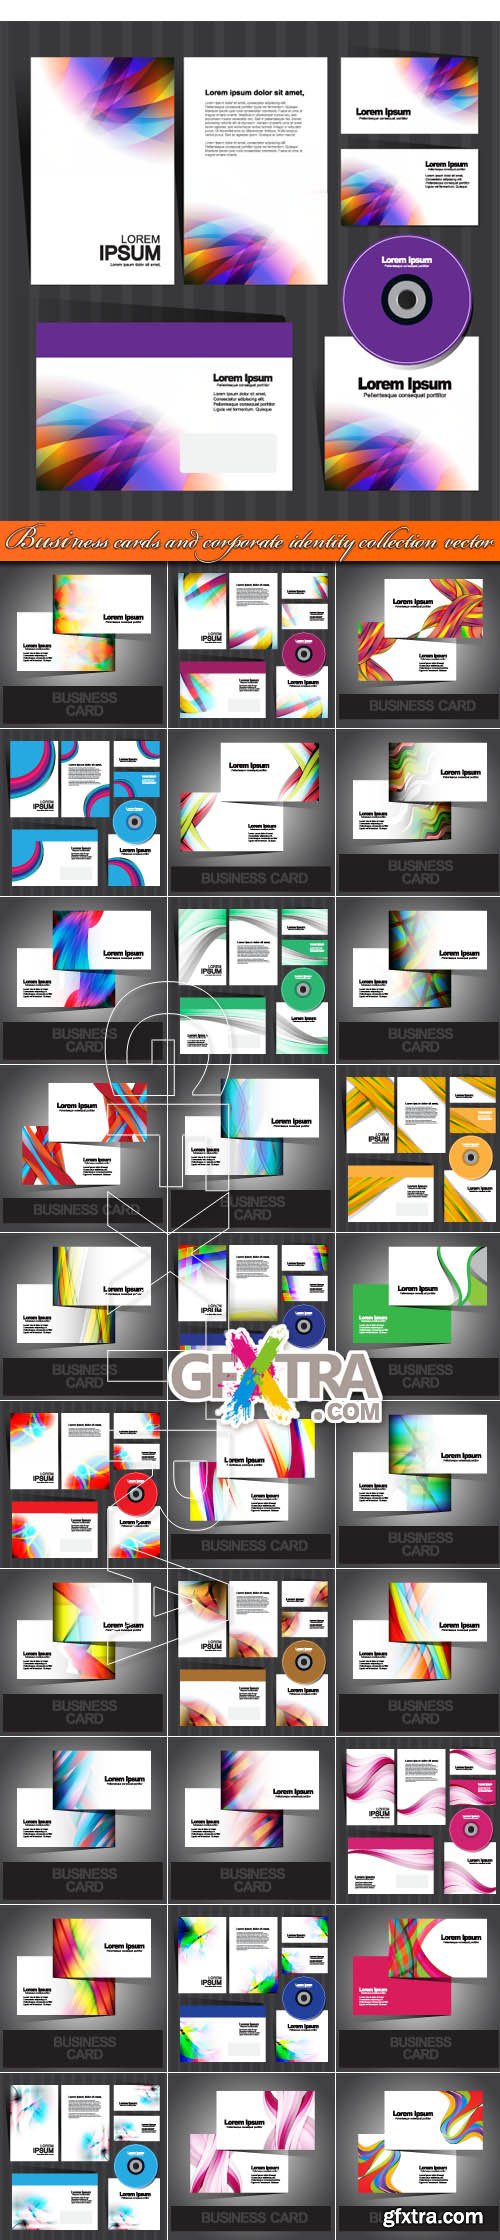 Business cards and corporate identity collection vector